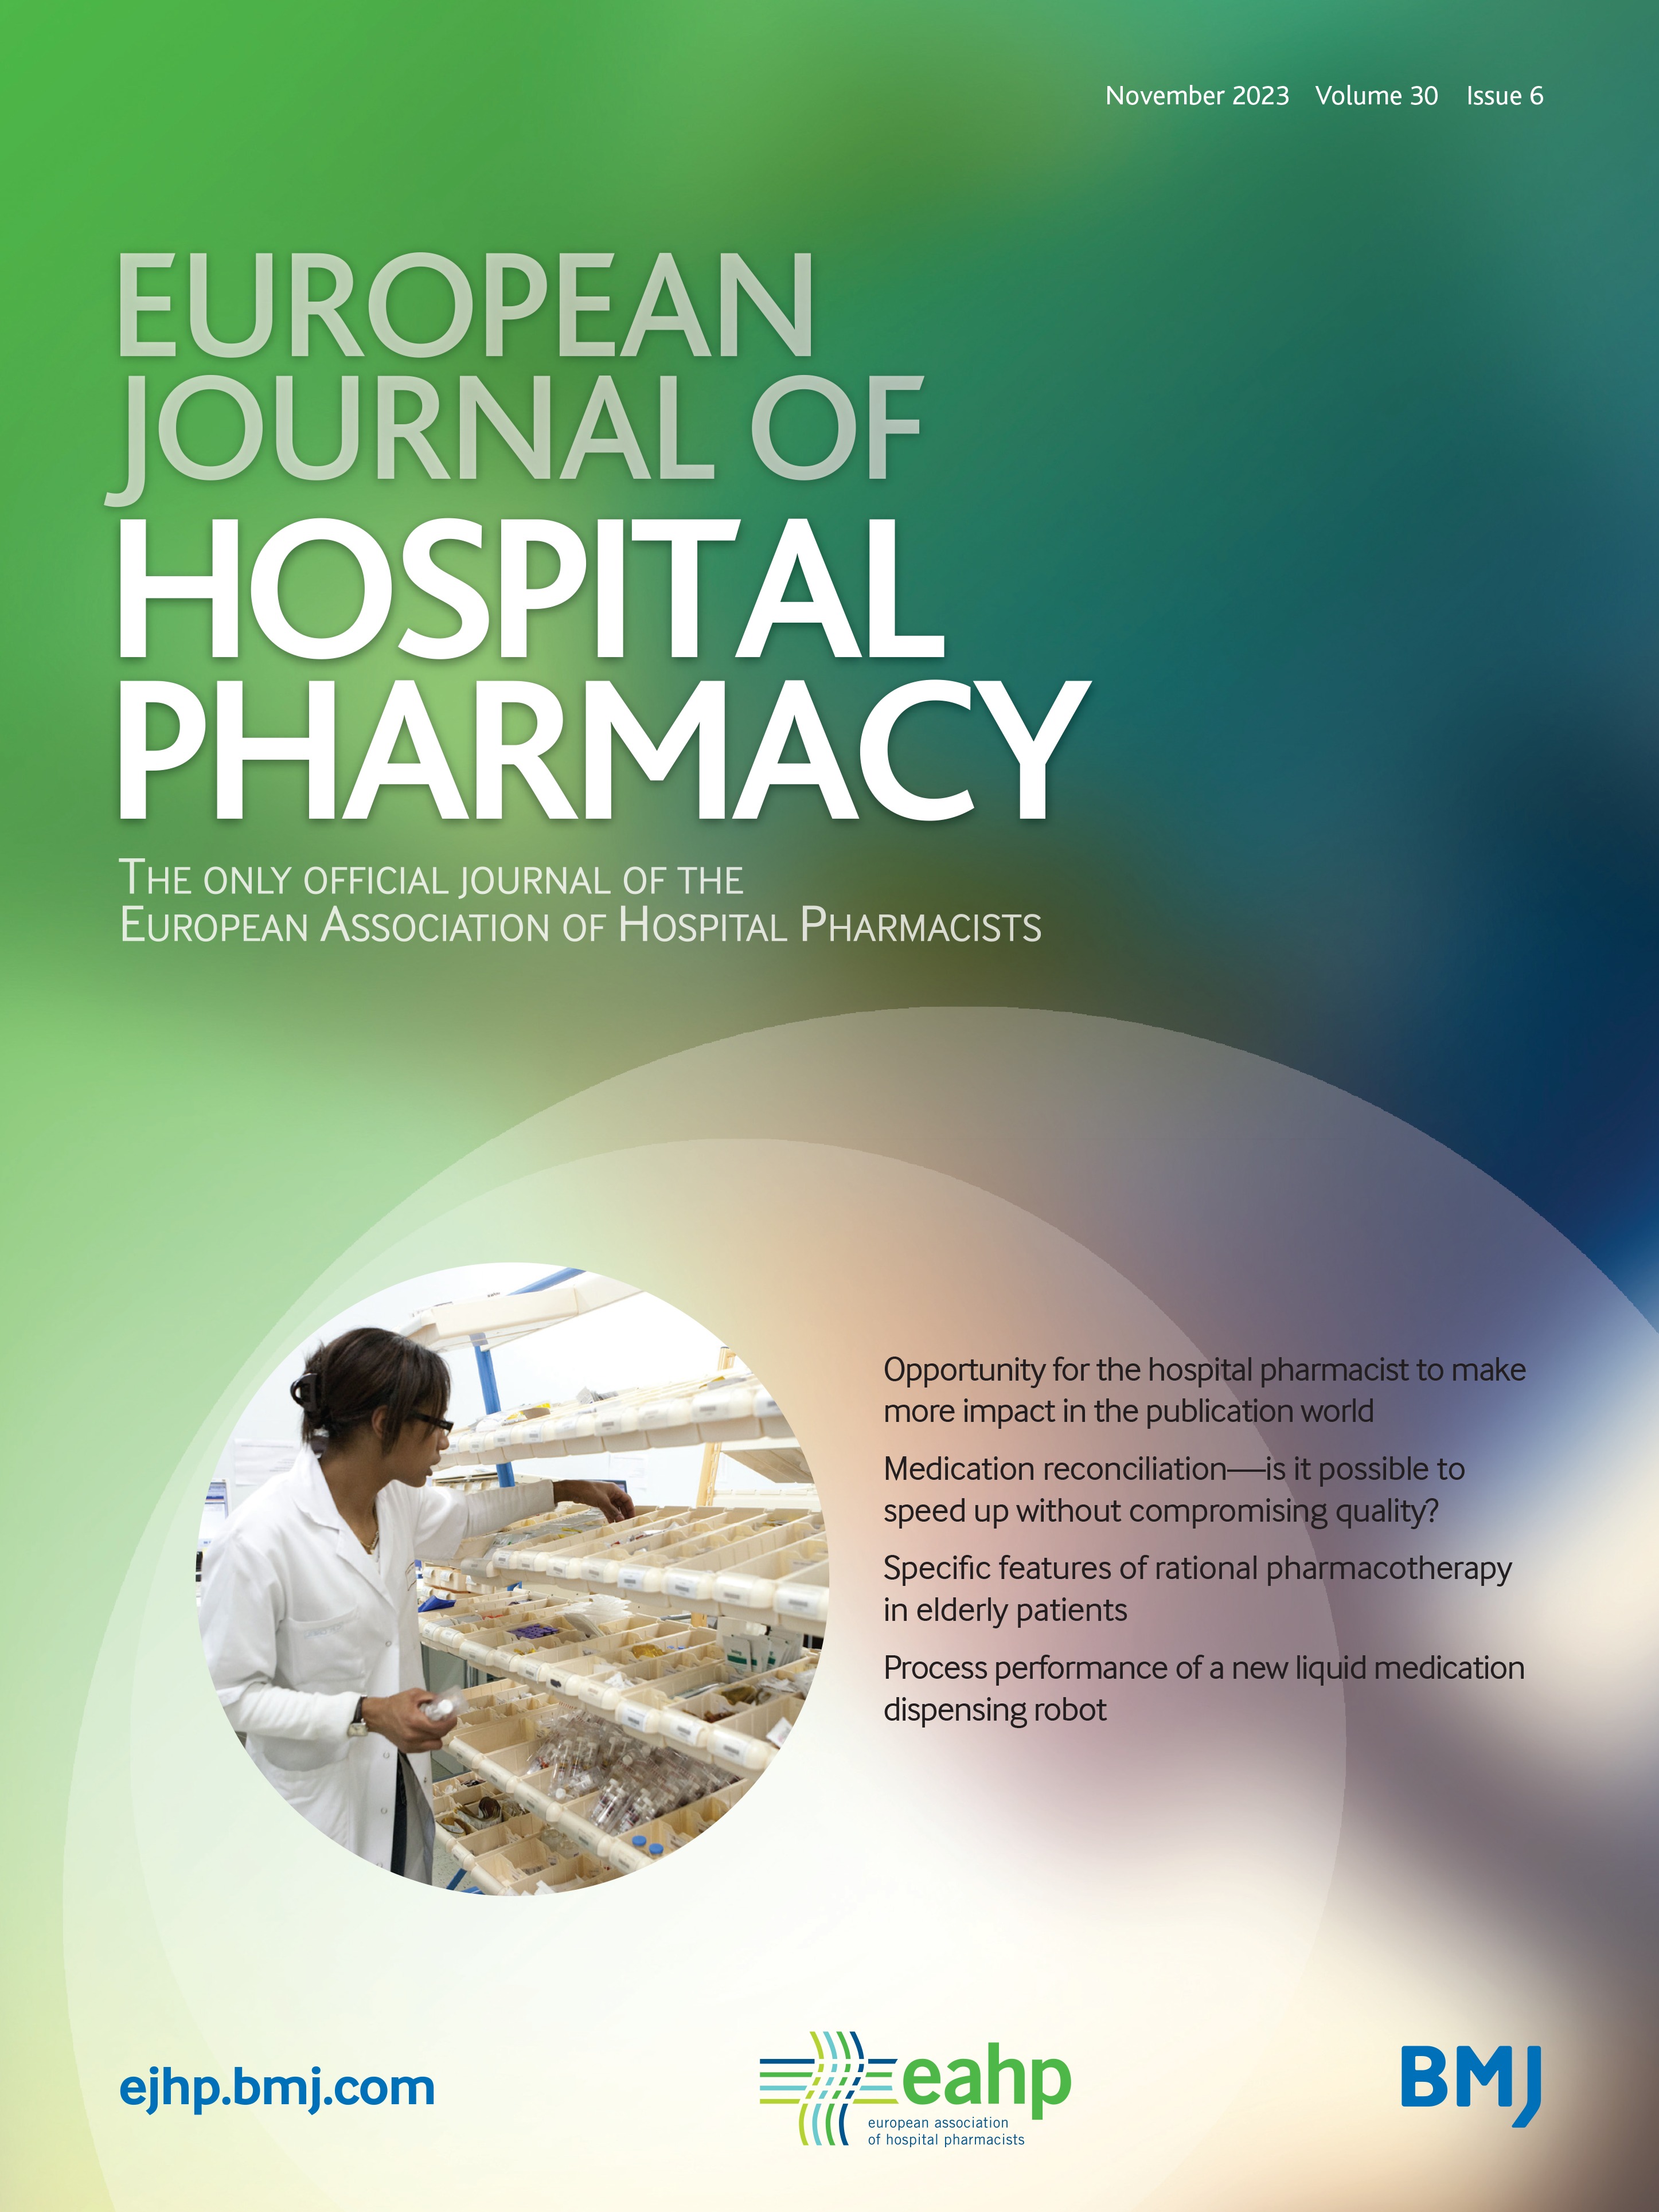 Monoclonal antibodies for the early treatment of paediatric COVID-19 patients: a tangible contribution from hospital pharmacists in the lack of evidence